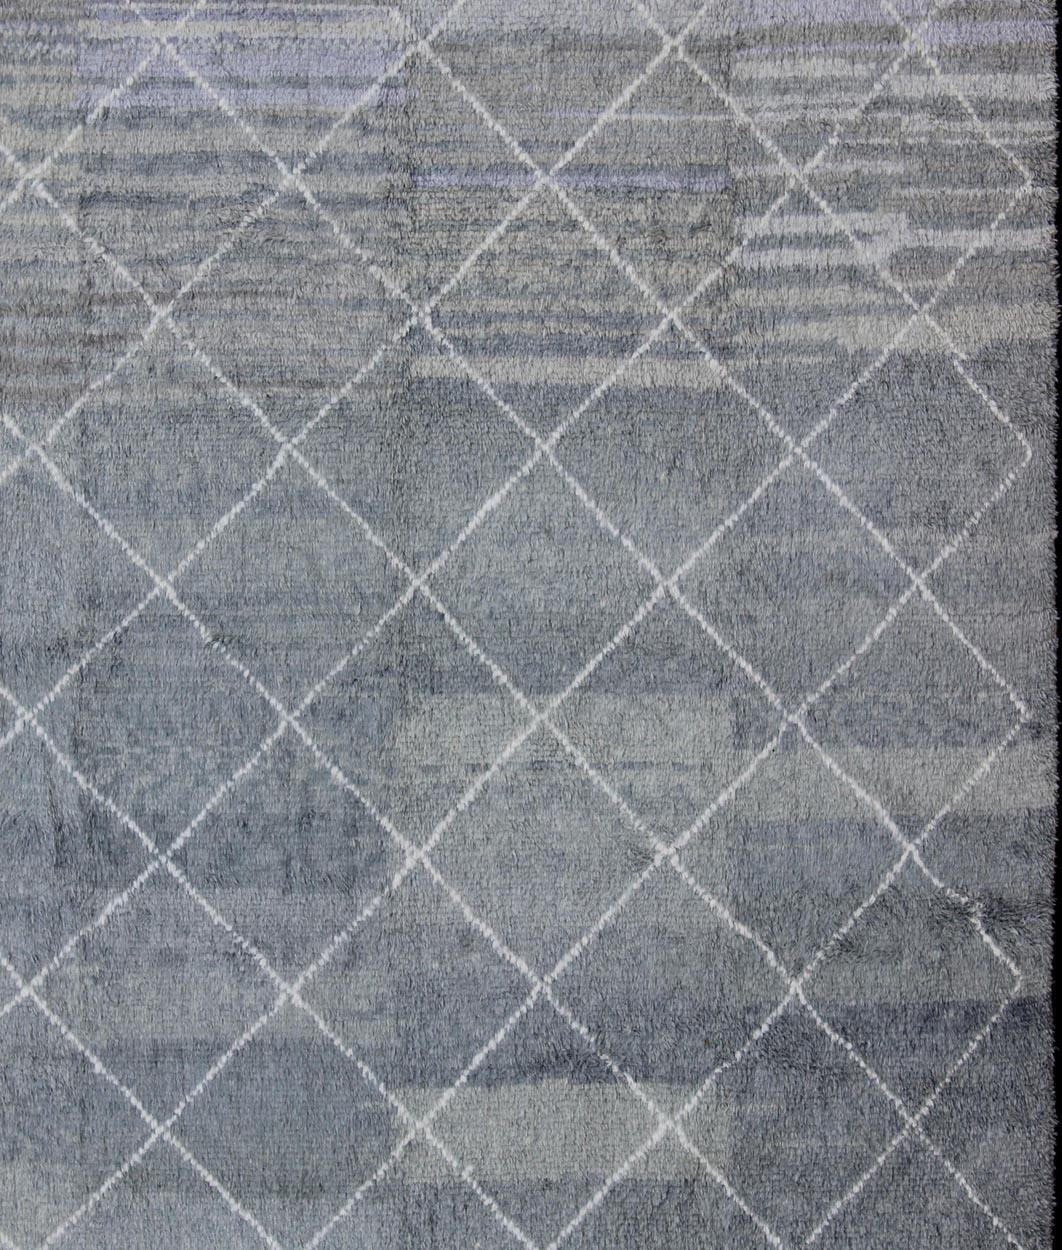 Modern Moroccan rug with all-over Lattice design in cream and gray, rug TU-ALG-29, country of origin / type: Turkey / Tribal

This tribal Moroccan/Tulu rug with a modern design rendered in a lattice pattern, features gray's and cream pattern. This